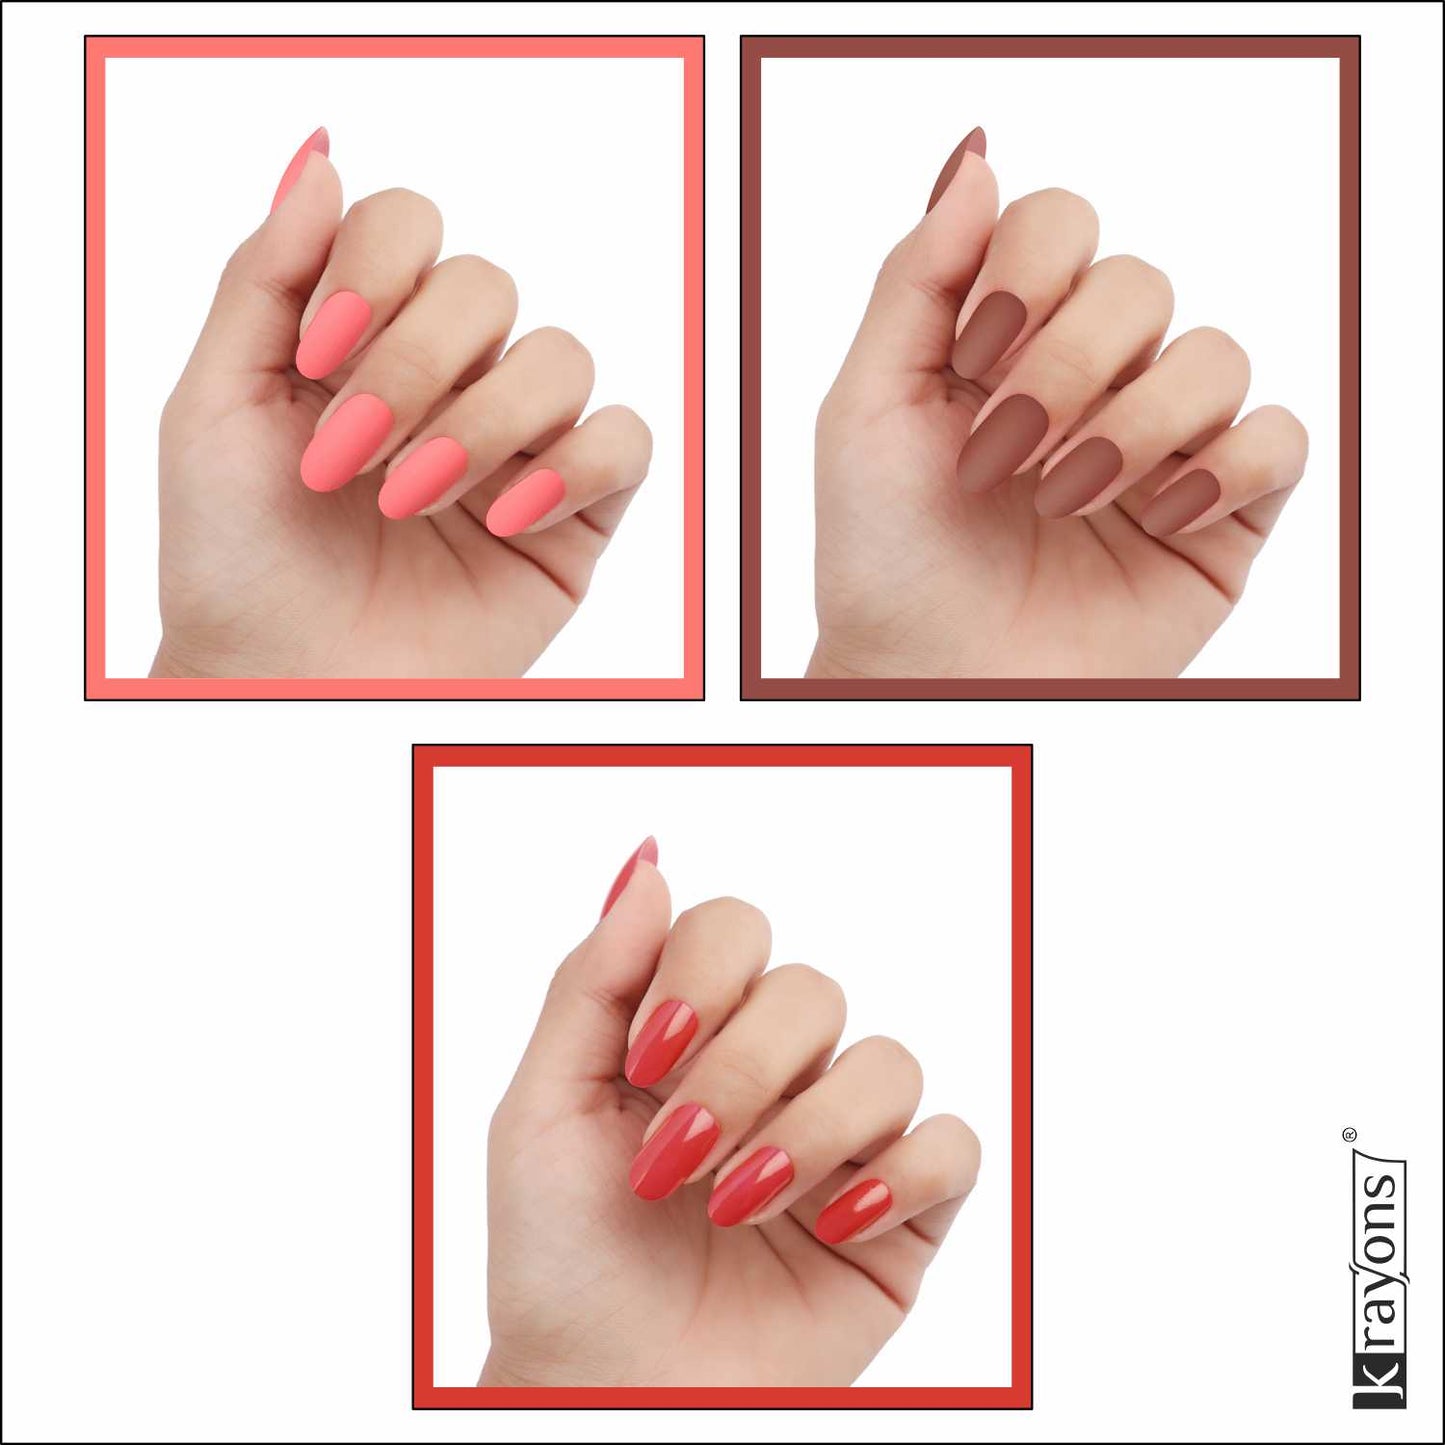 Krayons Cute Super Matte Finish Nail Enamel, Quick Dry, LongLasting, Blossom Peach, Chestnut Matte, Ruby Red, 6ml Each (Pack of 3)